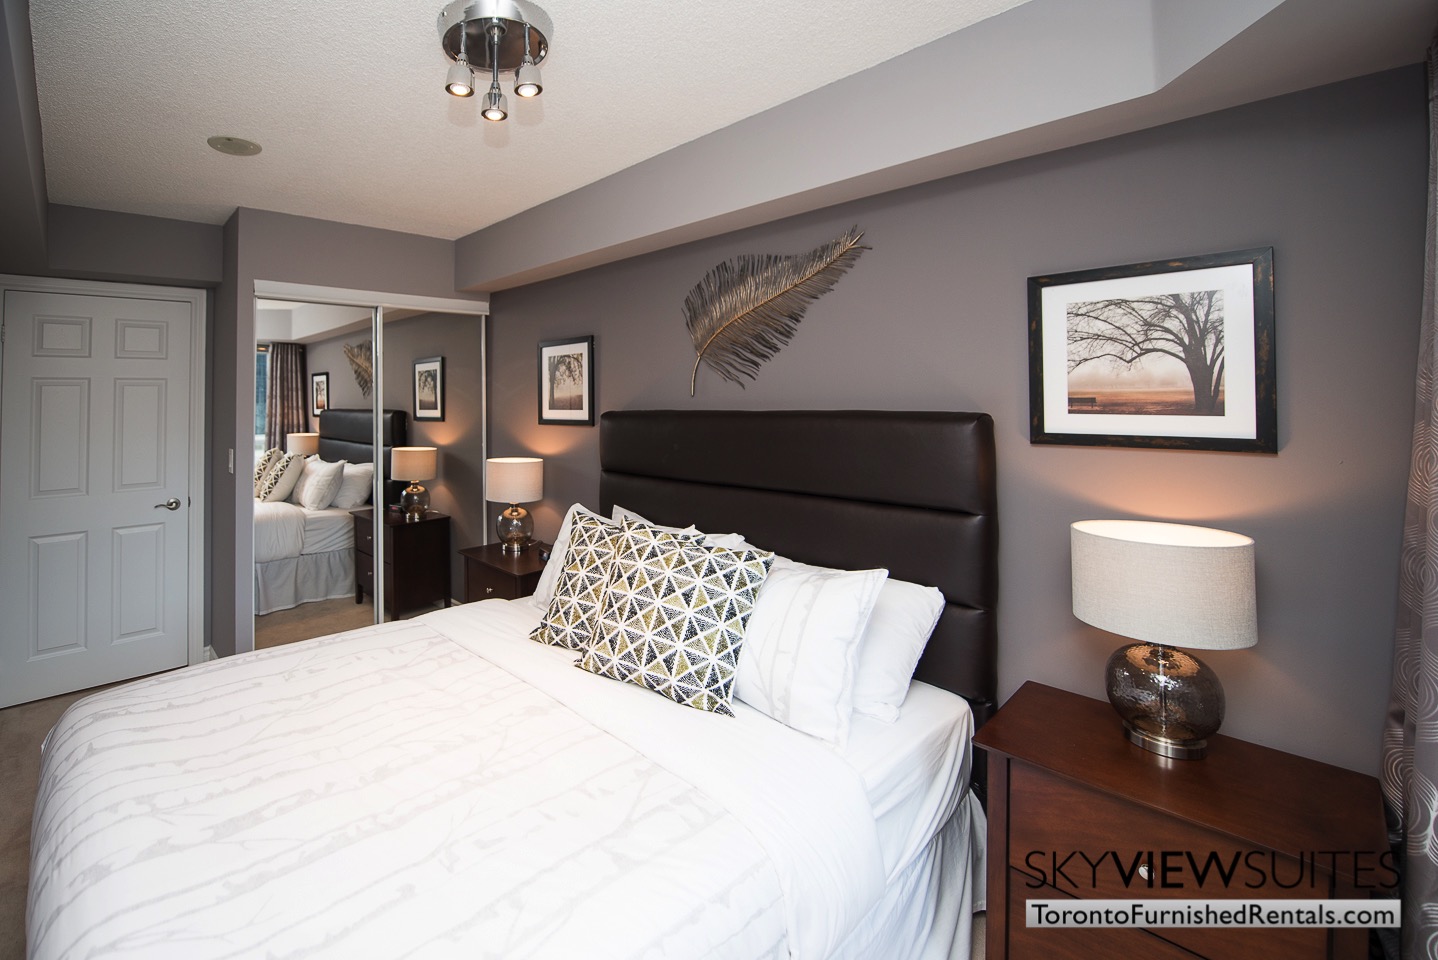 Wellington and Blue Jays Way executive rentals toronto bedroom well-decorated